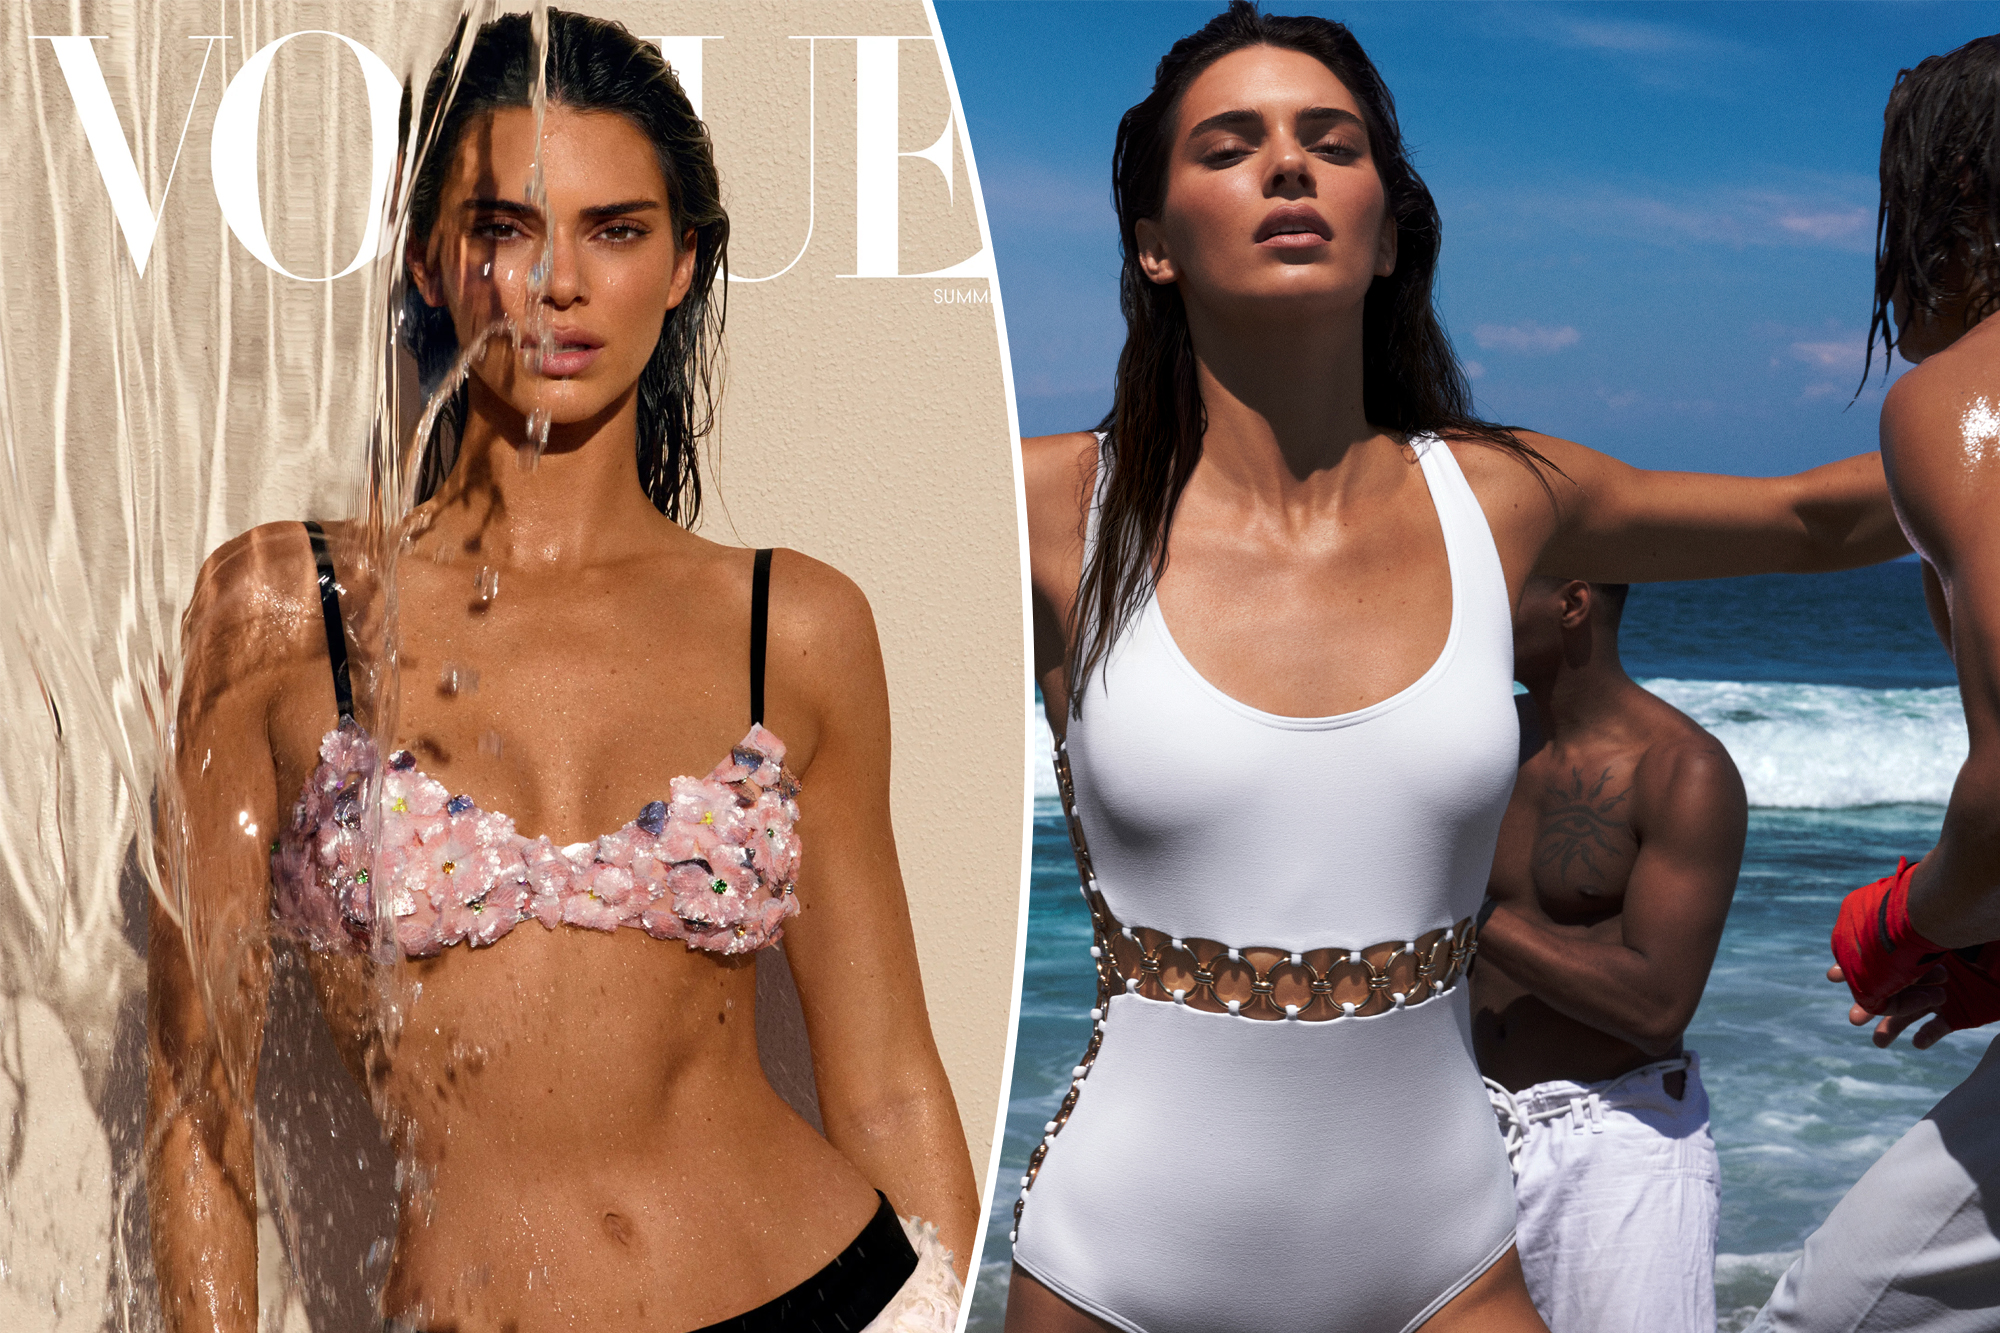 Kendall Jenner Stuns in Wet Looks for Vogue Cover Shoot